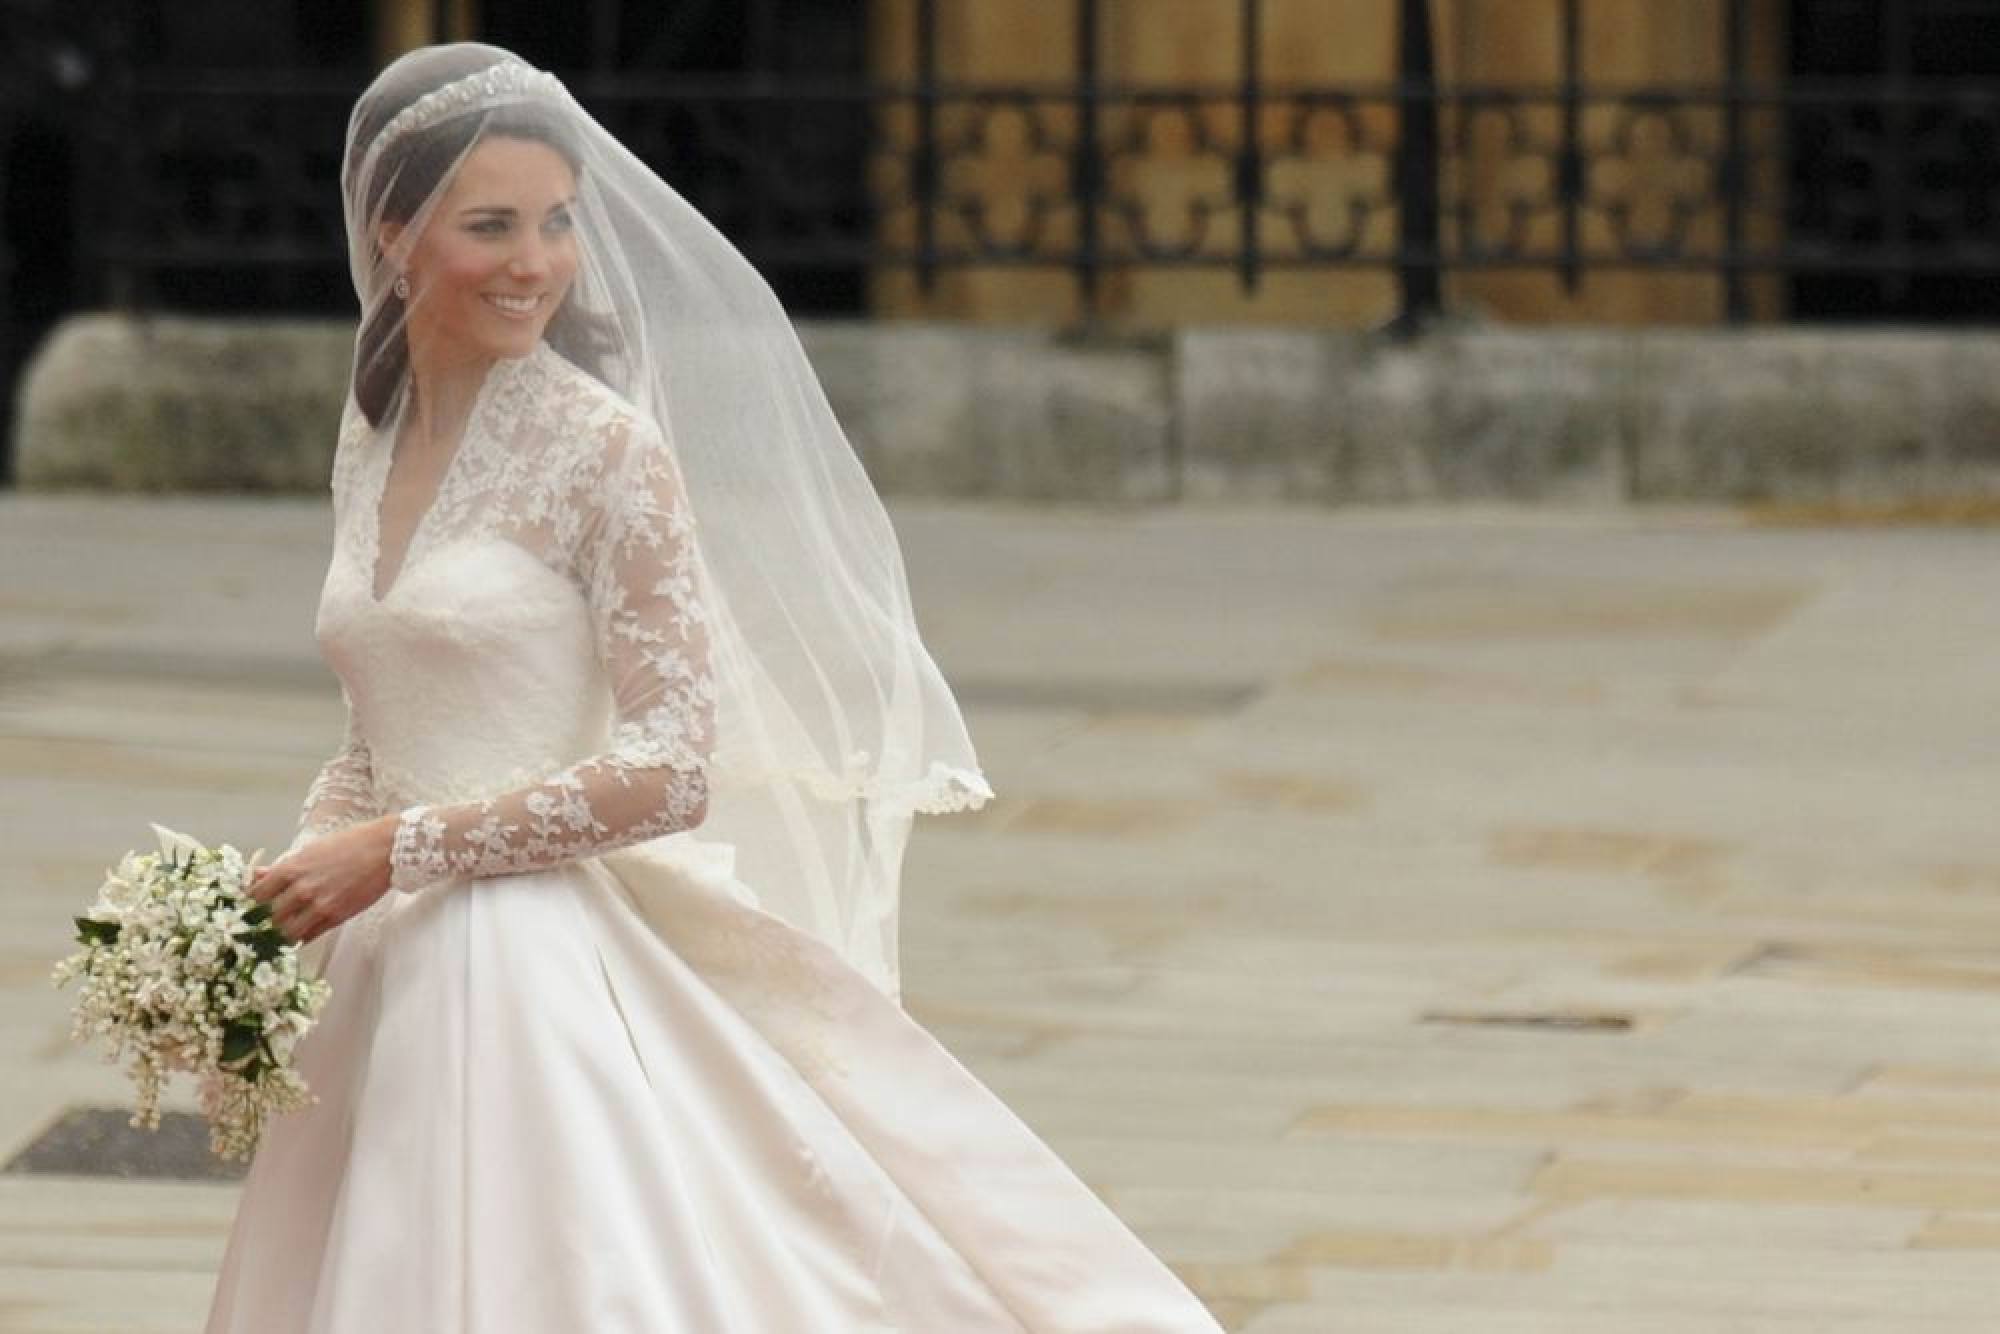 Celebrity Wedding Dresses: Photos of the Top Searched Dresses of